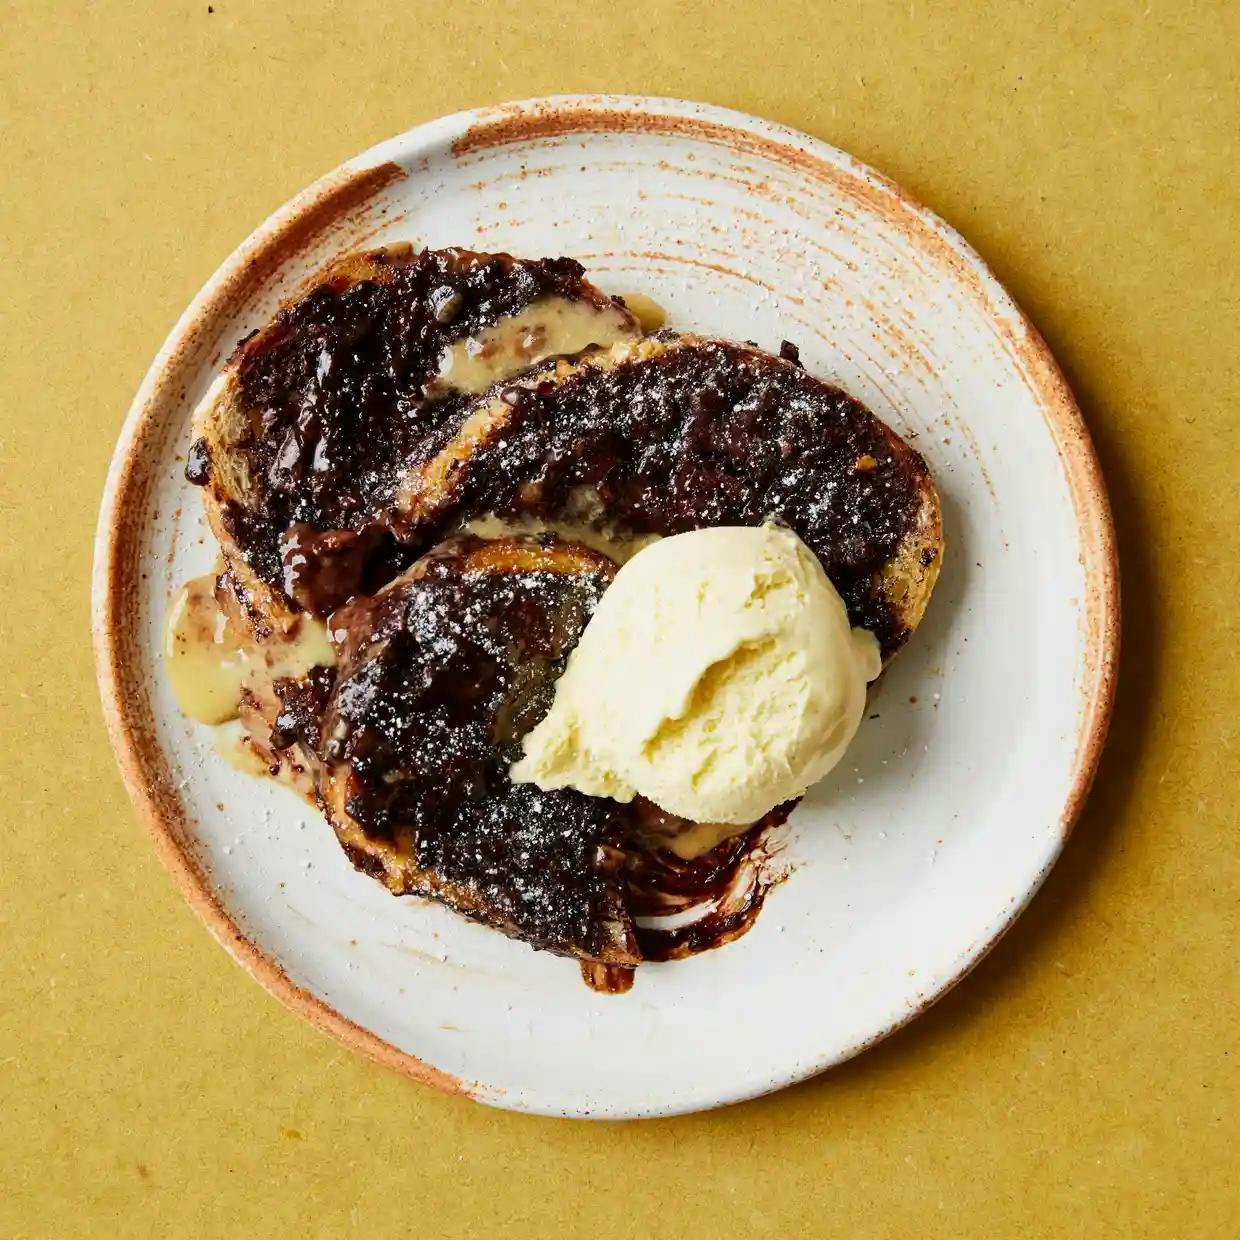 Chocolate-and-hazelnut bread-and-butter pudding